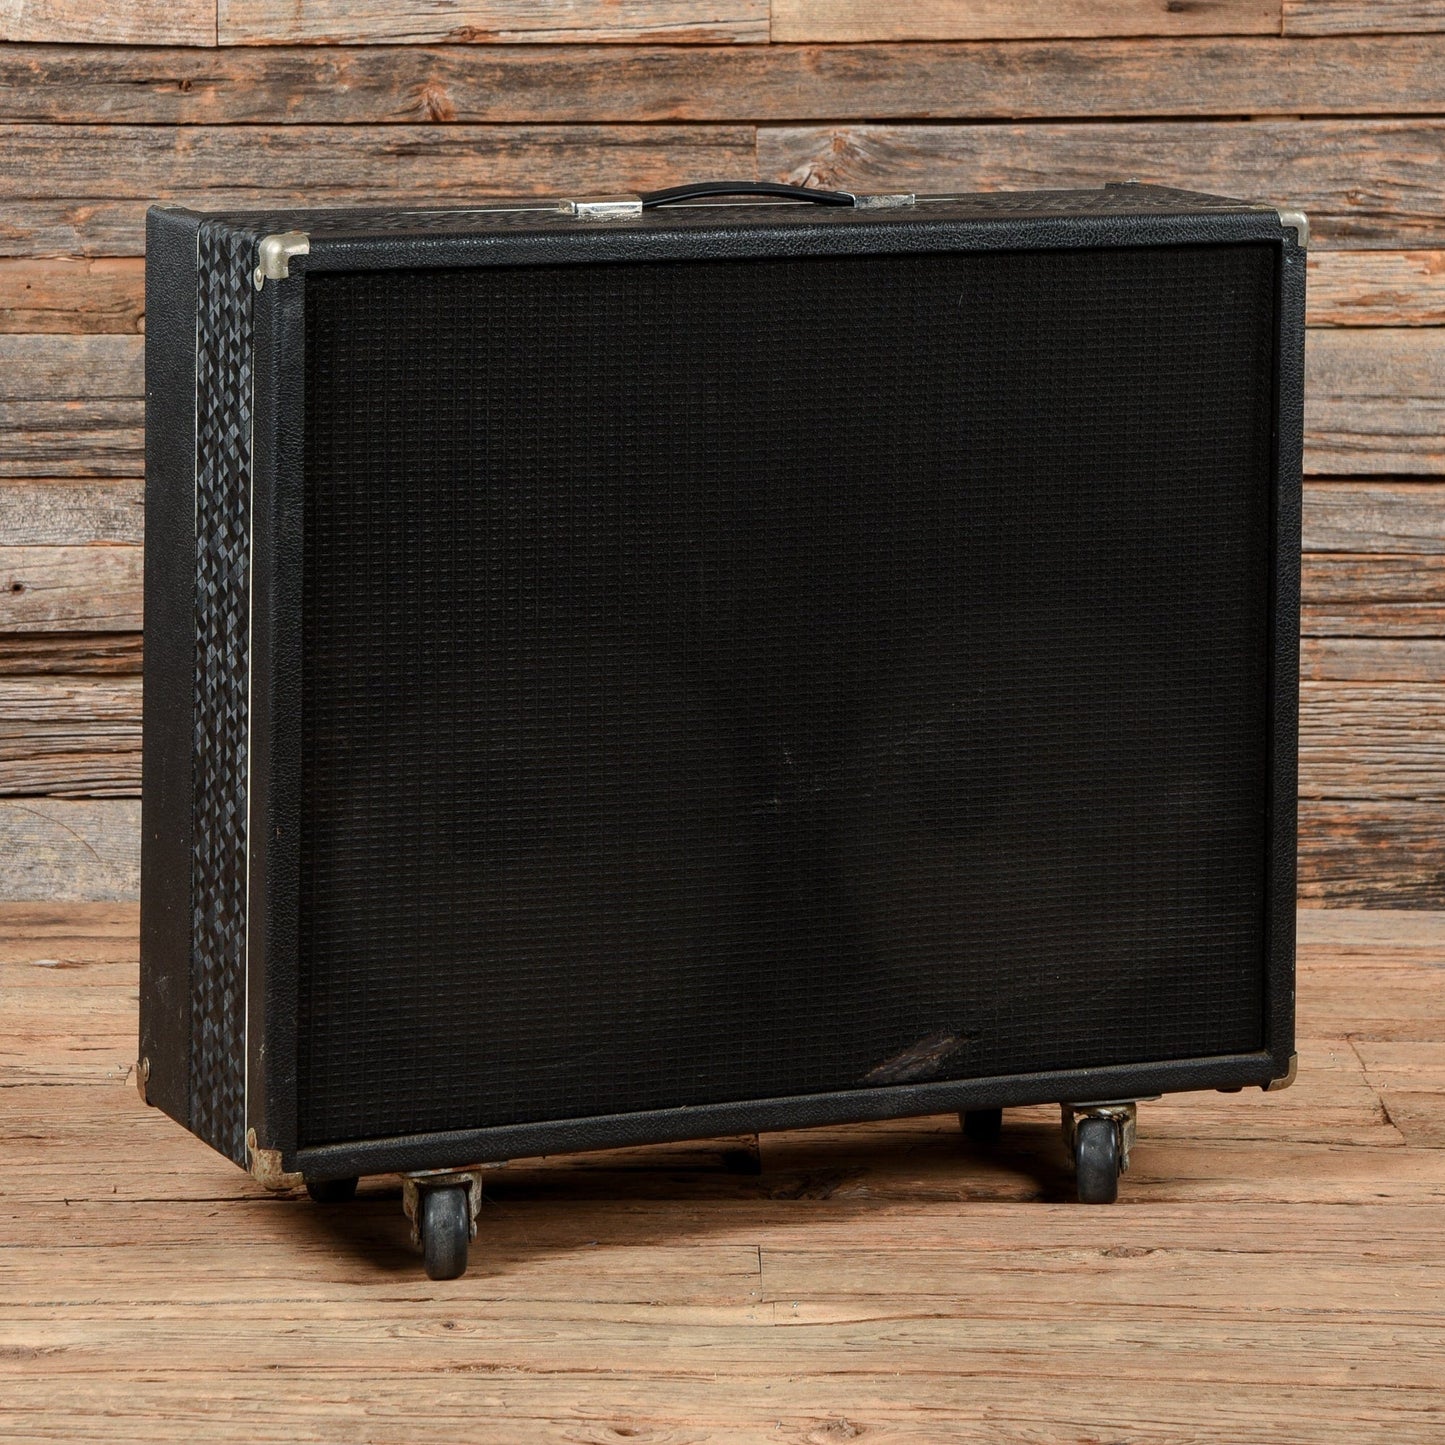 Twilighter 260R 2x10" Combo Amplifier  1967 Amps / Guitar Cabinets